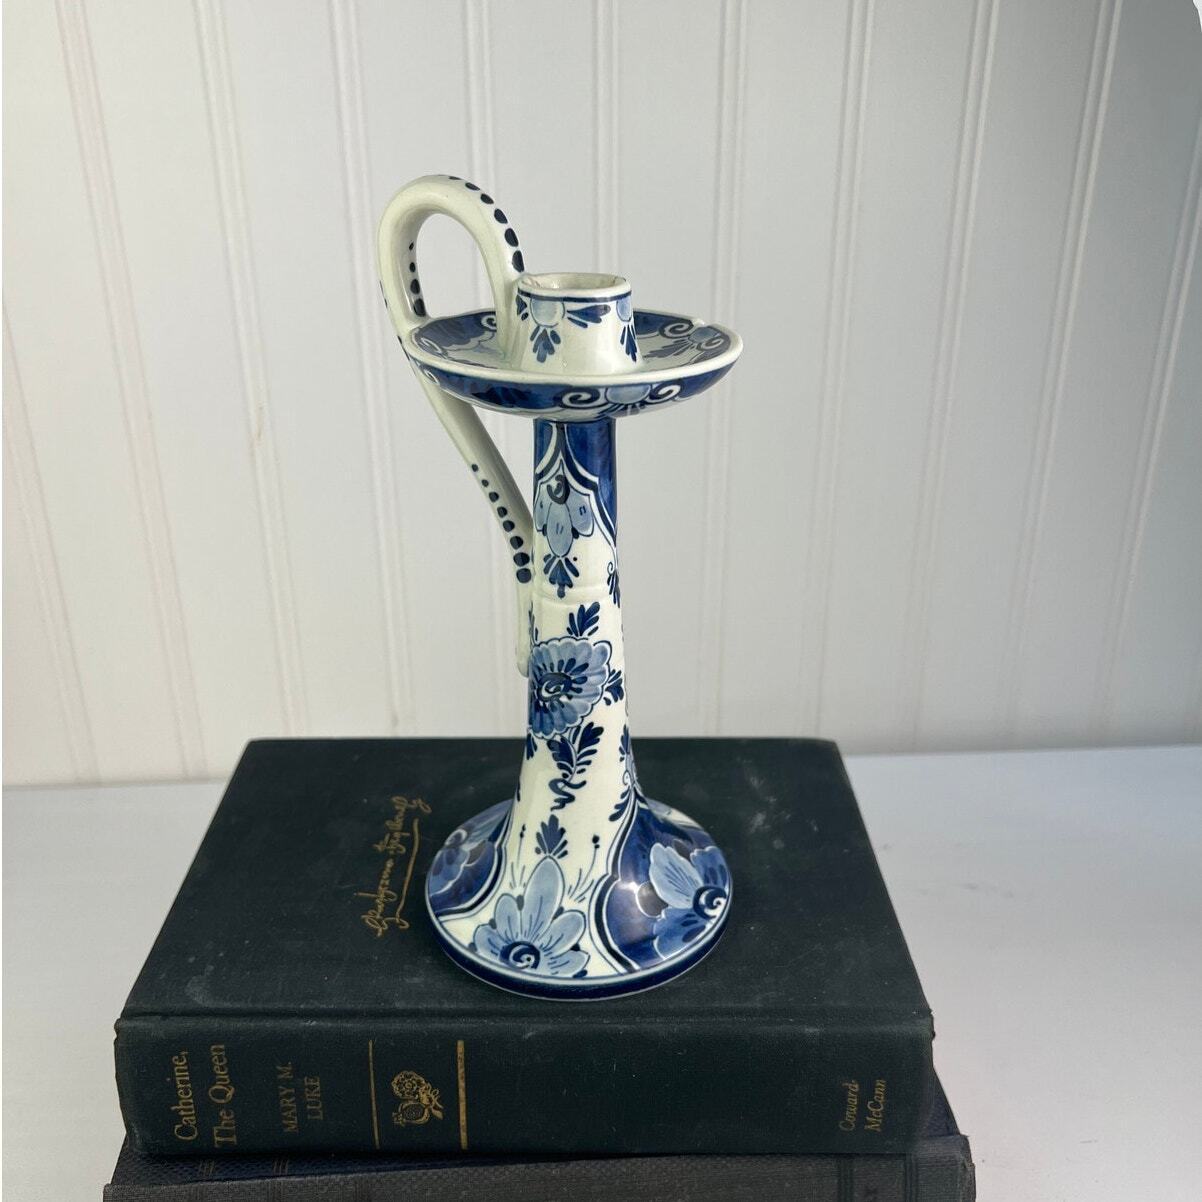 Delft Handpainted Candlestick Dutch Antique Pottery Regina Signed *AS IS*